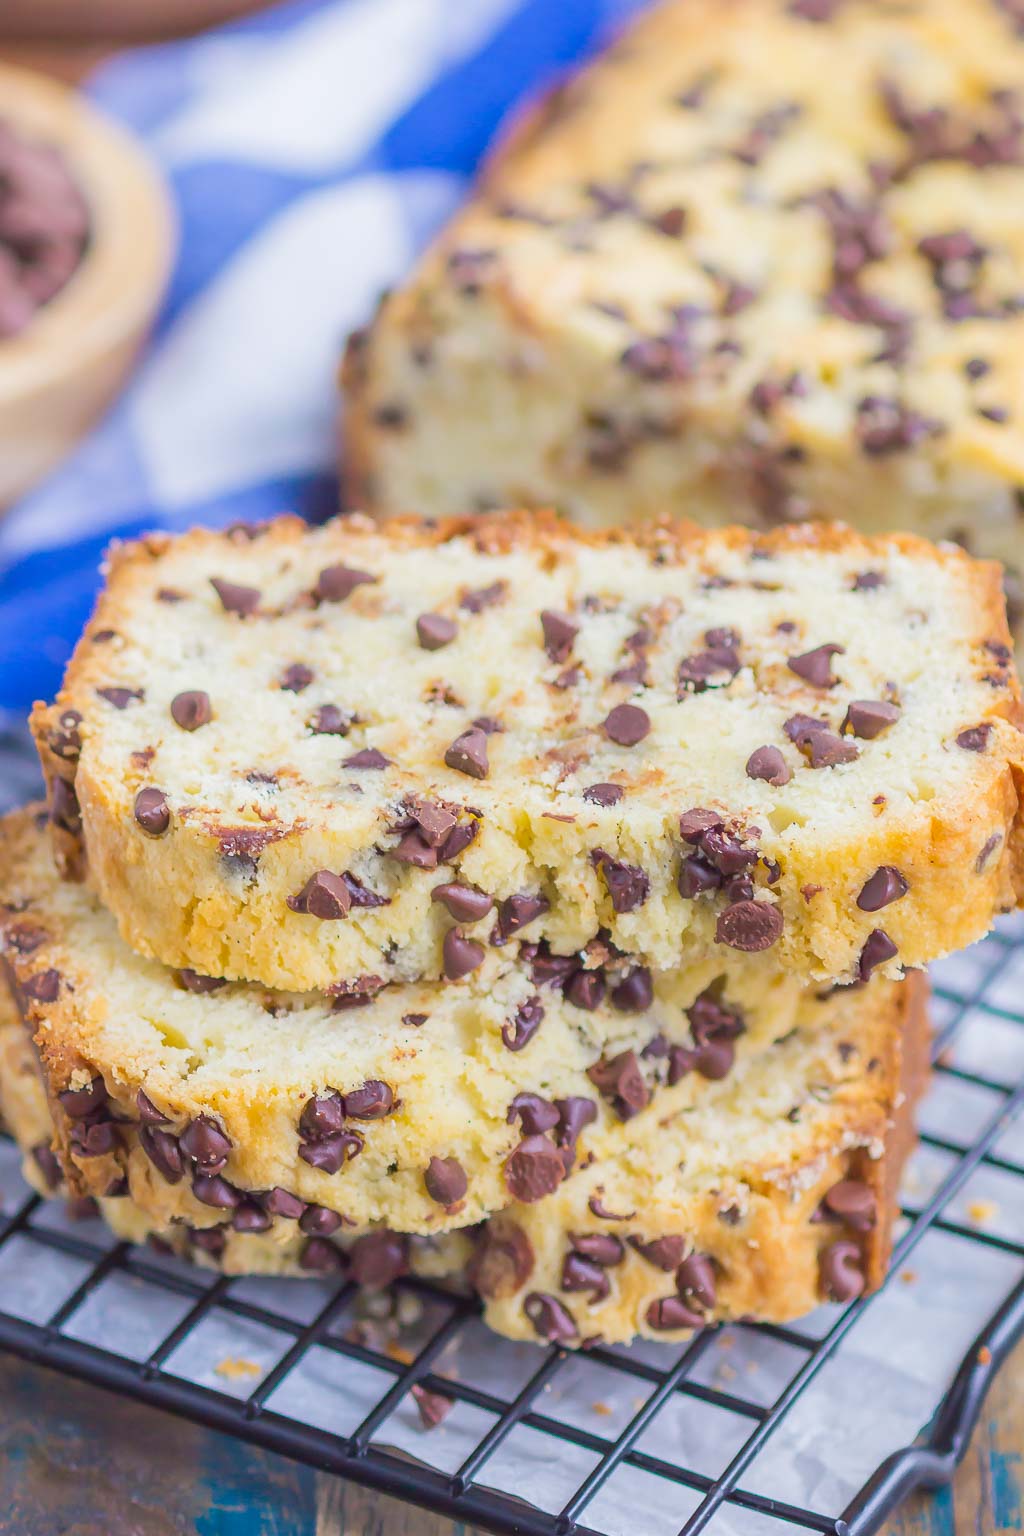 Chocolate Chip Pound Cake is a simple, one bowl recipe that results in a soft, rich, and buttery taste. Perfect to serve for parties, get-togethers, or even breakfast!